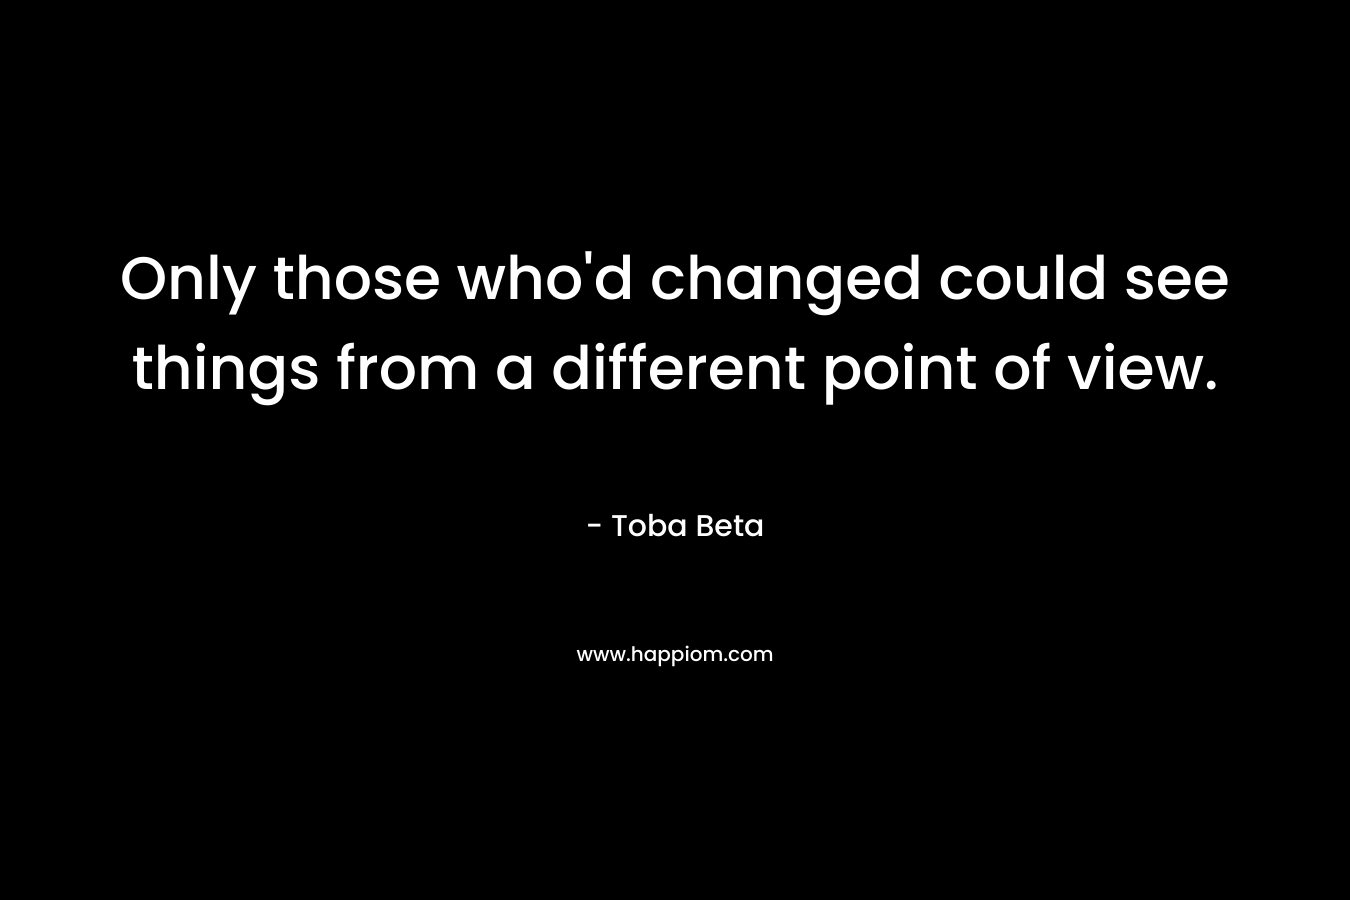 Only those who’d changed could see things from a different point of view. – Toba Beta